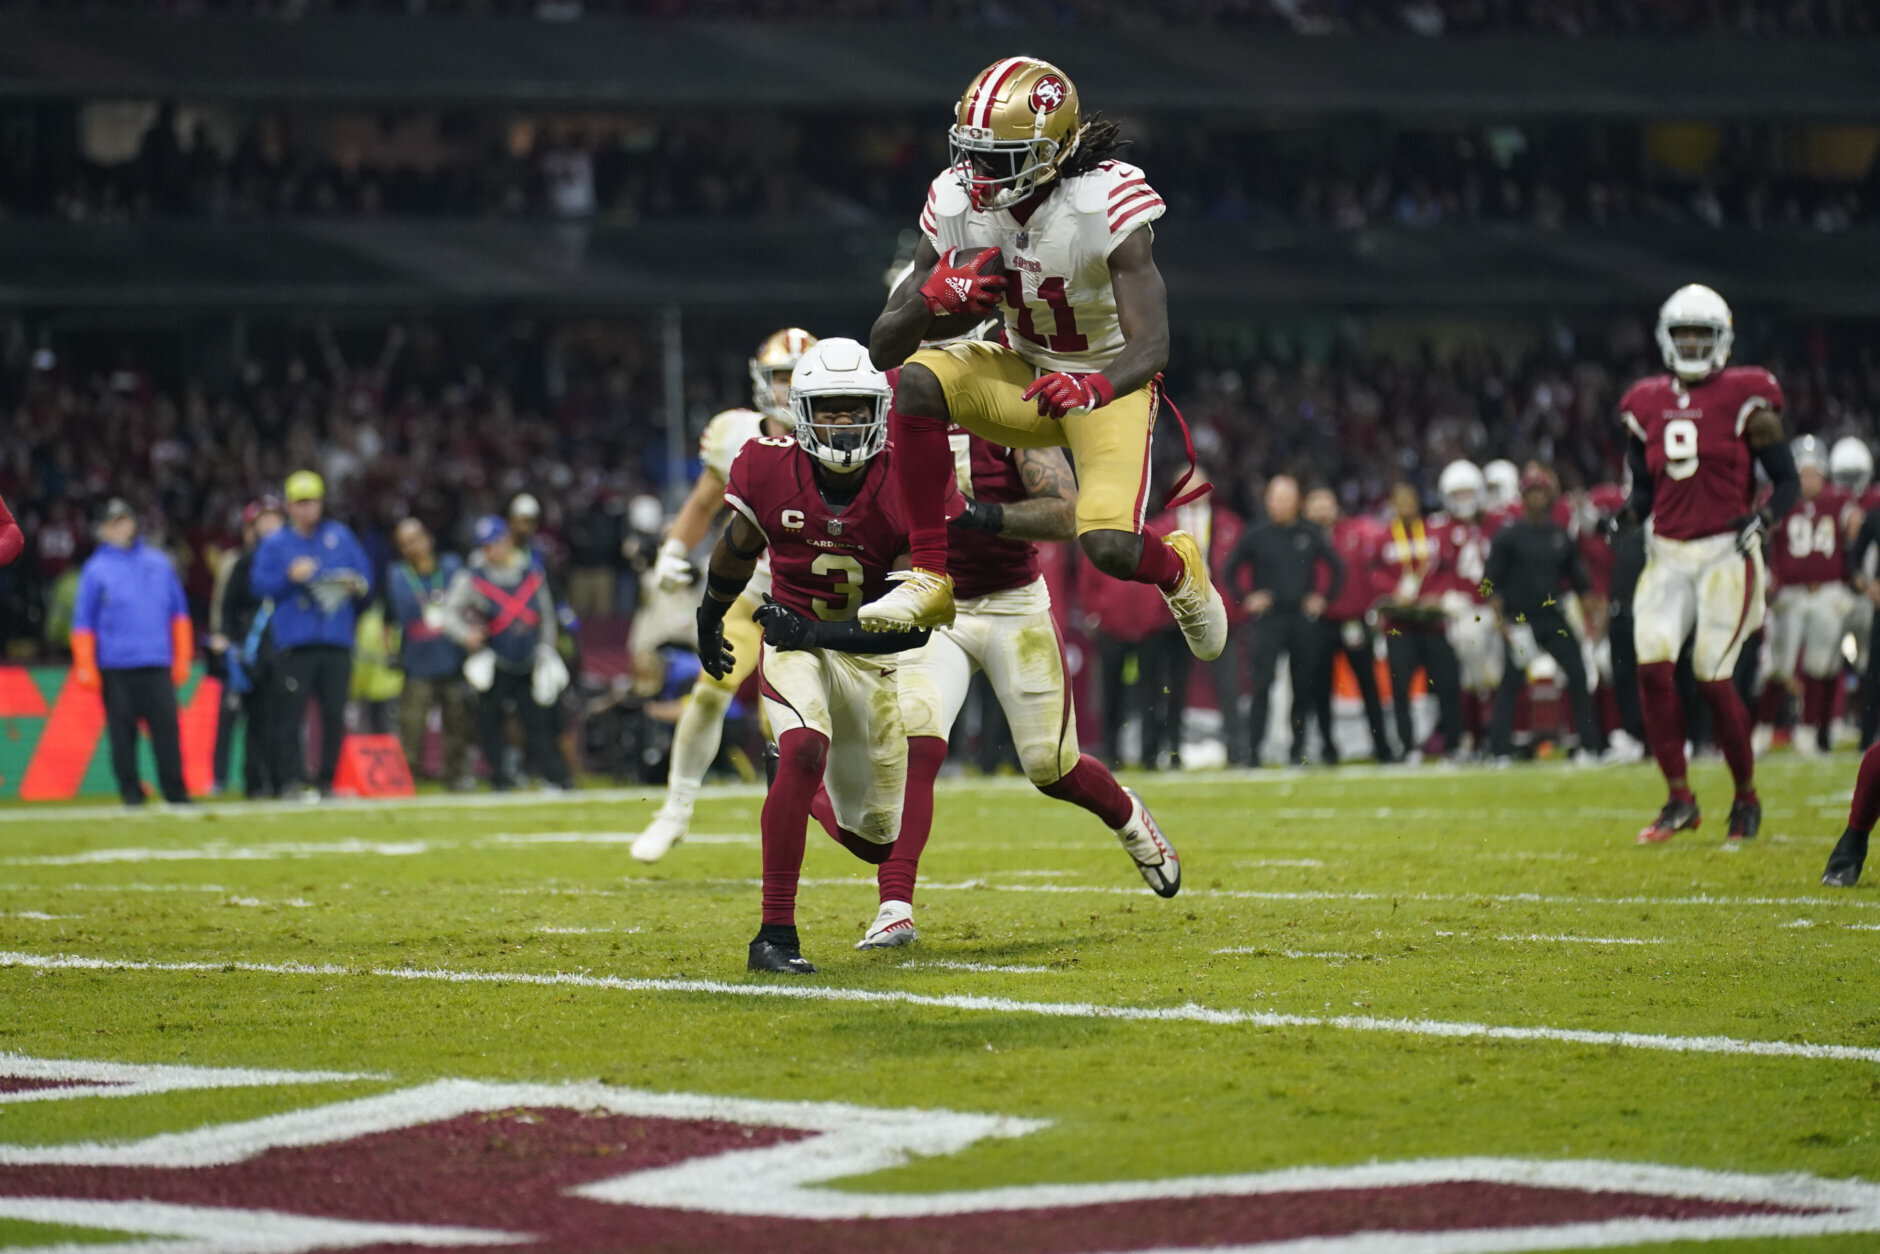 <p><b><i>49ers 38</i></b><br />
<b><i>Cardinals 10</i></b></p>
<p>San Francisco dominated the stands in Mexico City and between the white lines, surging to the top of the NFC West by <a href="https://twitter.com/ESPNStatsInfo/status/1594915008781041664?s=20&amp;t=PswF0XVP9FMNLOUIOC889g">dominating the division head-to-head</a> and displaying their Super Bowl recipe is still intact. It really feels like Washington&#8217;s visit to Santa Clara will be a de facto playoff game.</p>
